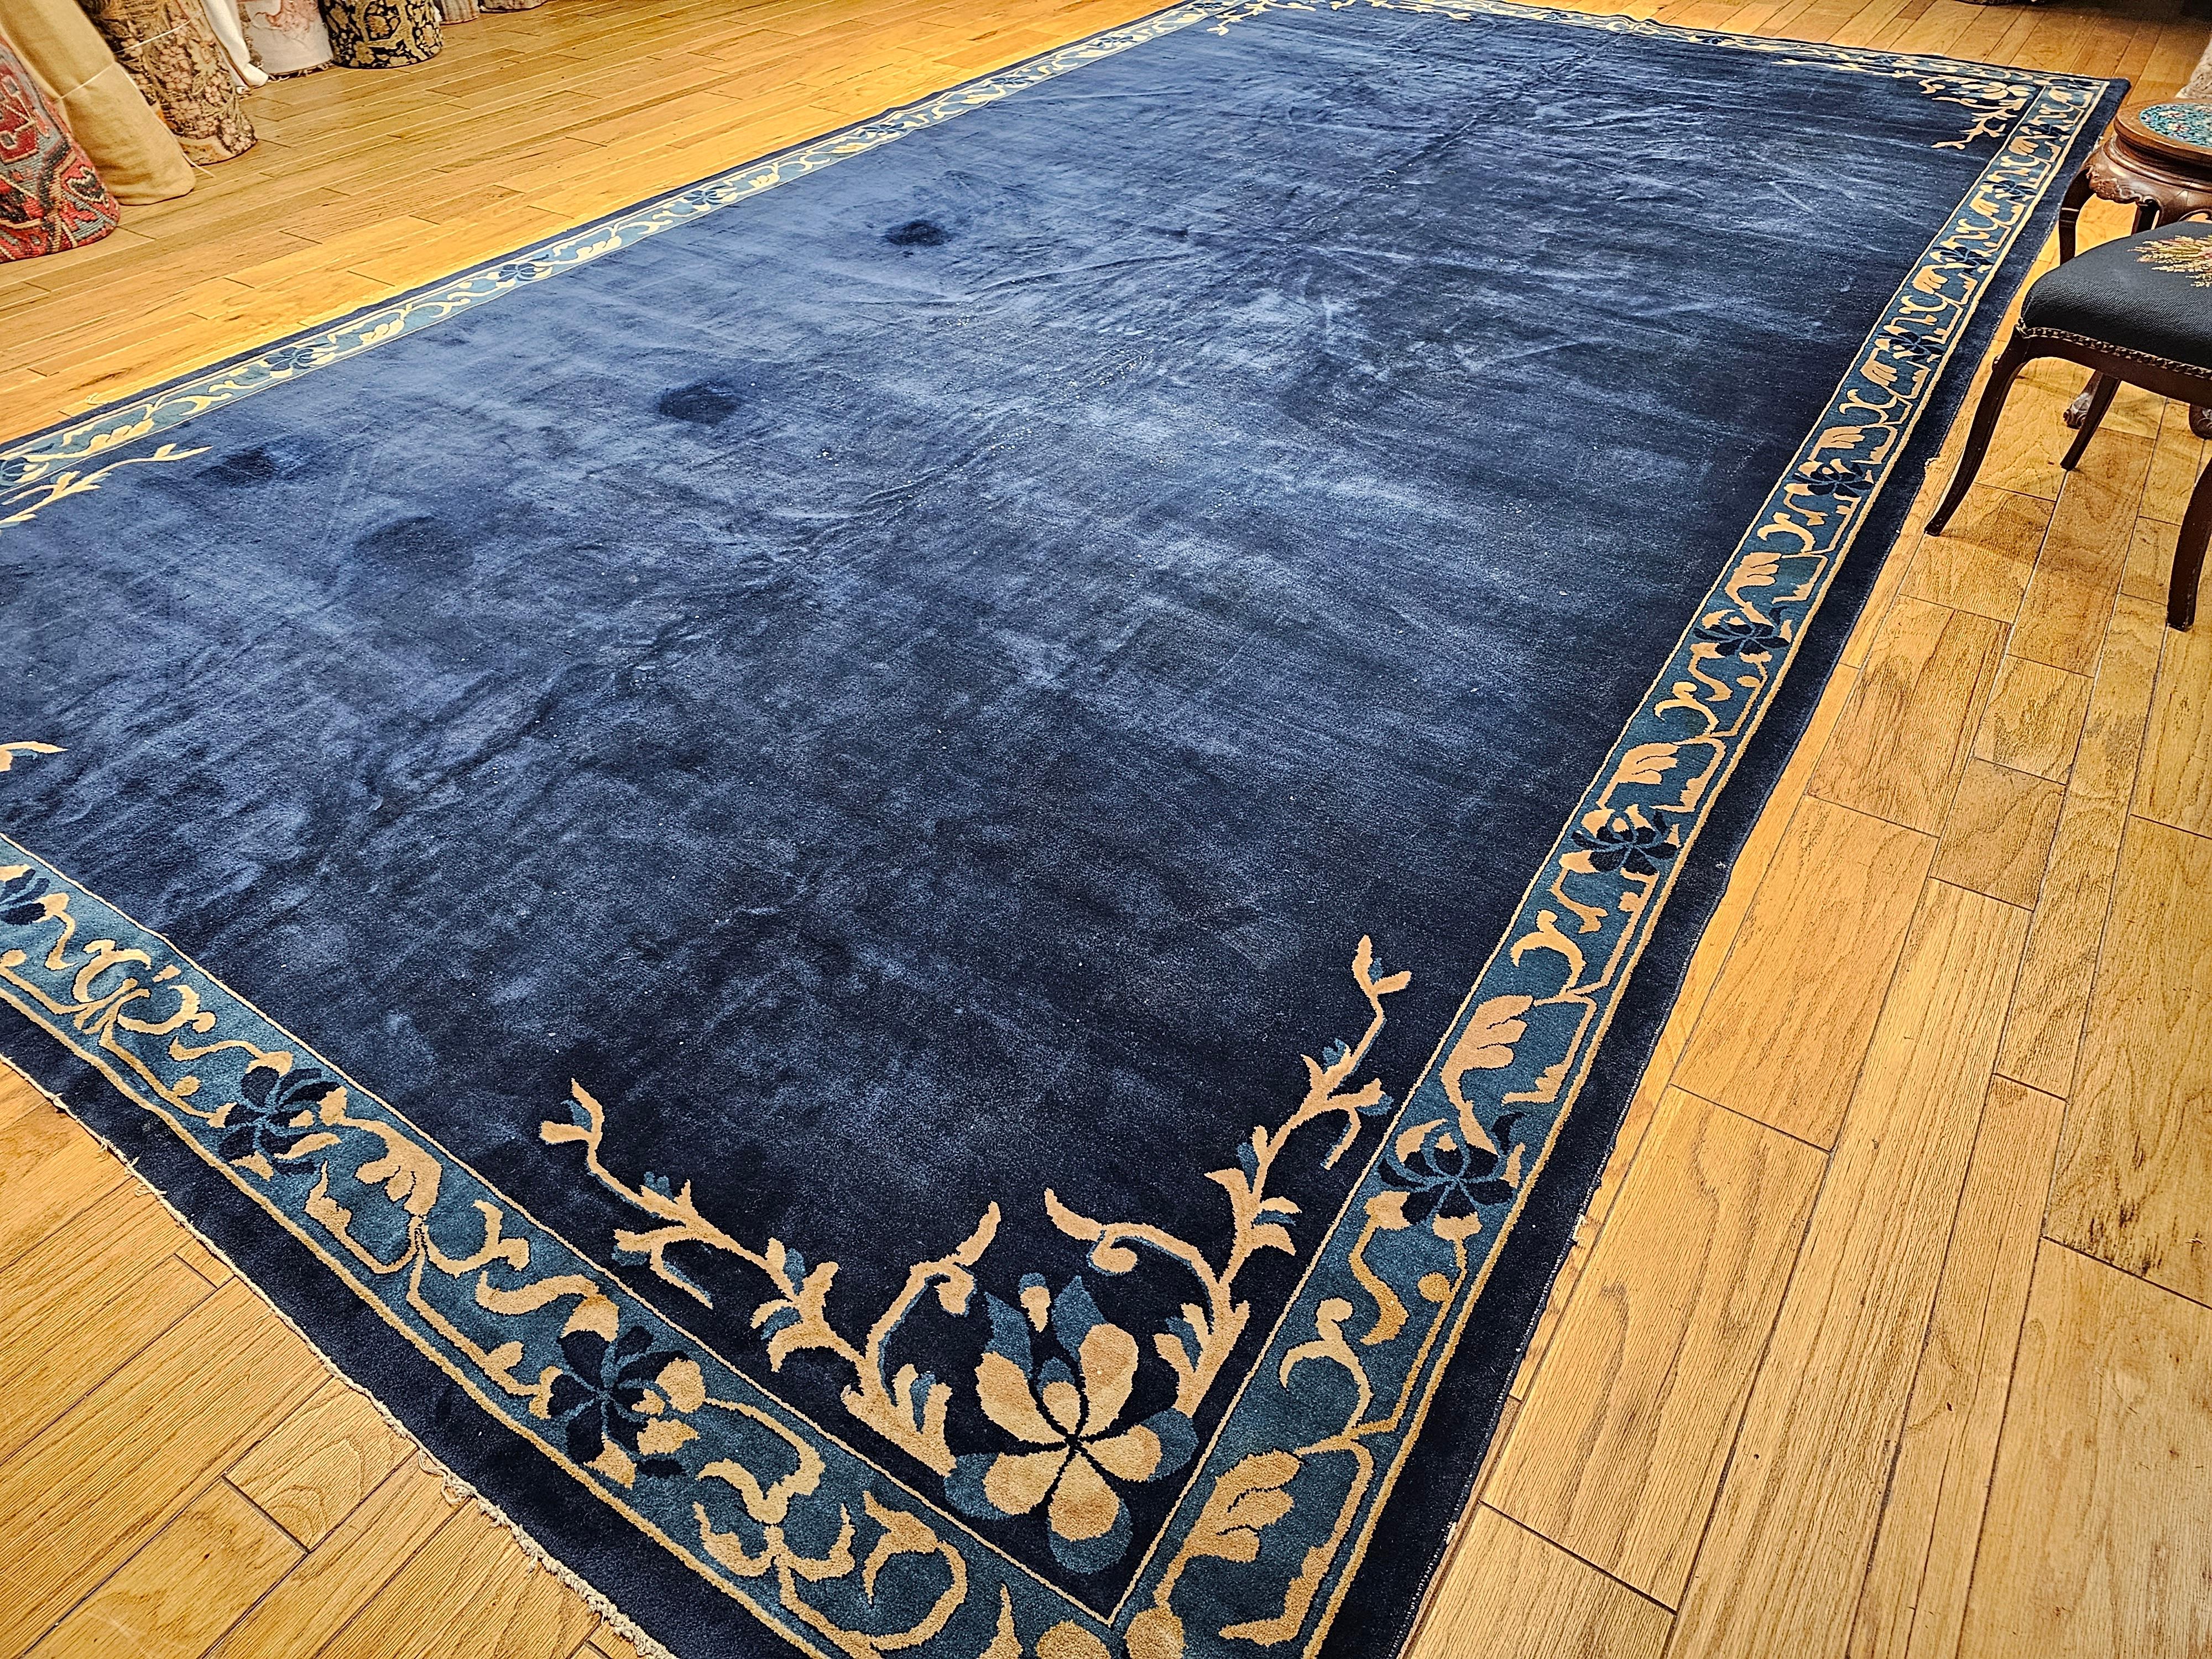 Hand-Woven Oversize Art Deco Chinese Rug in Open Field Design in Navy, Gold, Baby Blue For Sale